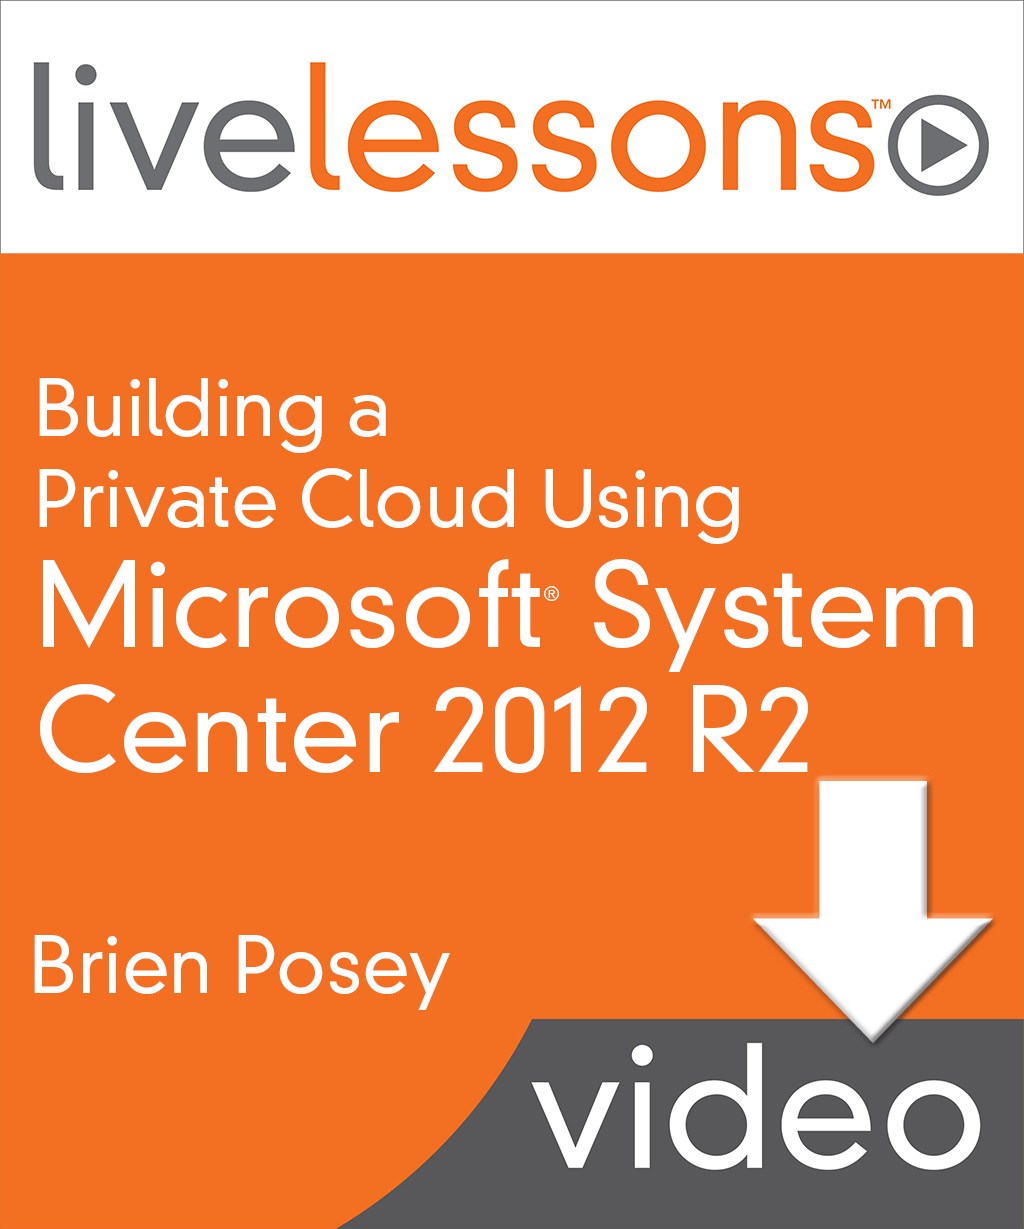 Building a Private Cloud Using Microsoft System Center 2012 R2 Live Lessons (Video Training)